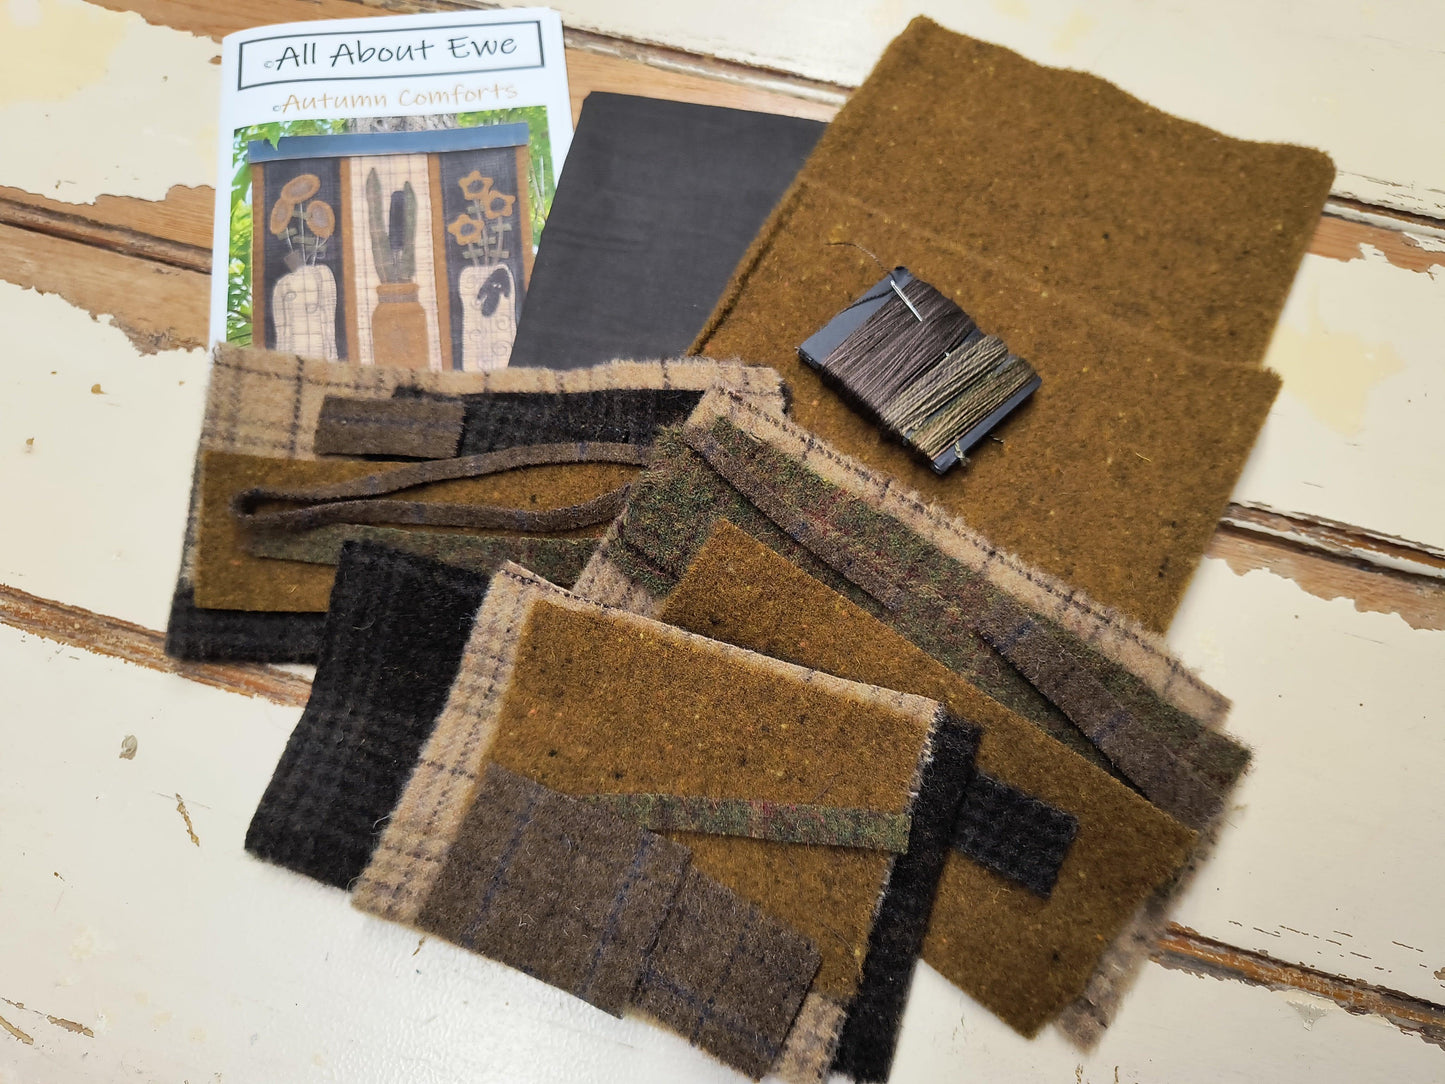 Autumn Comforts Kit - All About Ewe Wool Shop